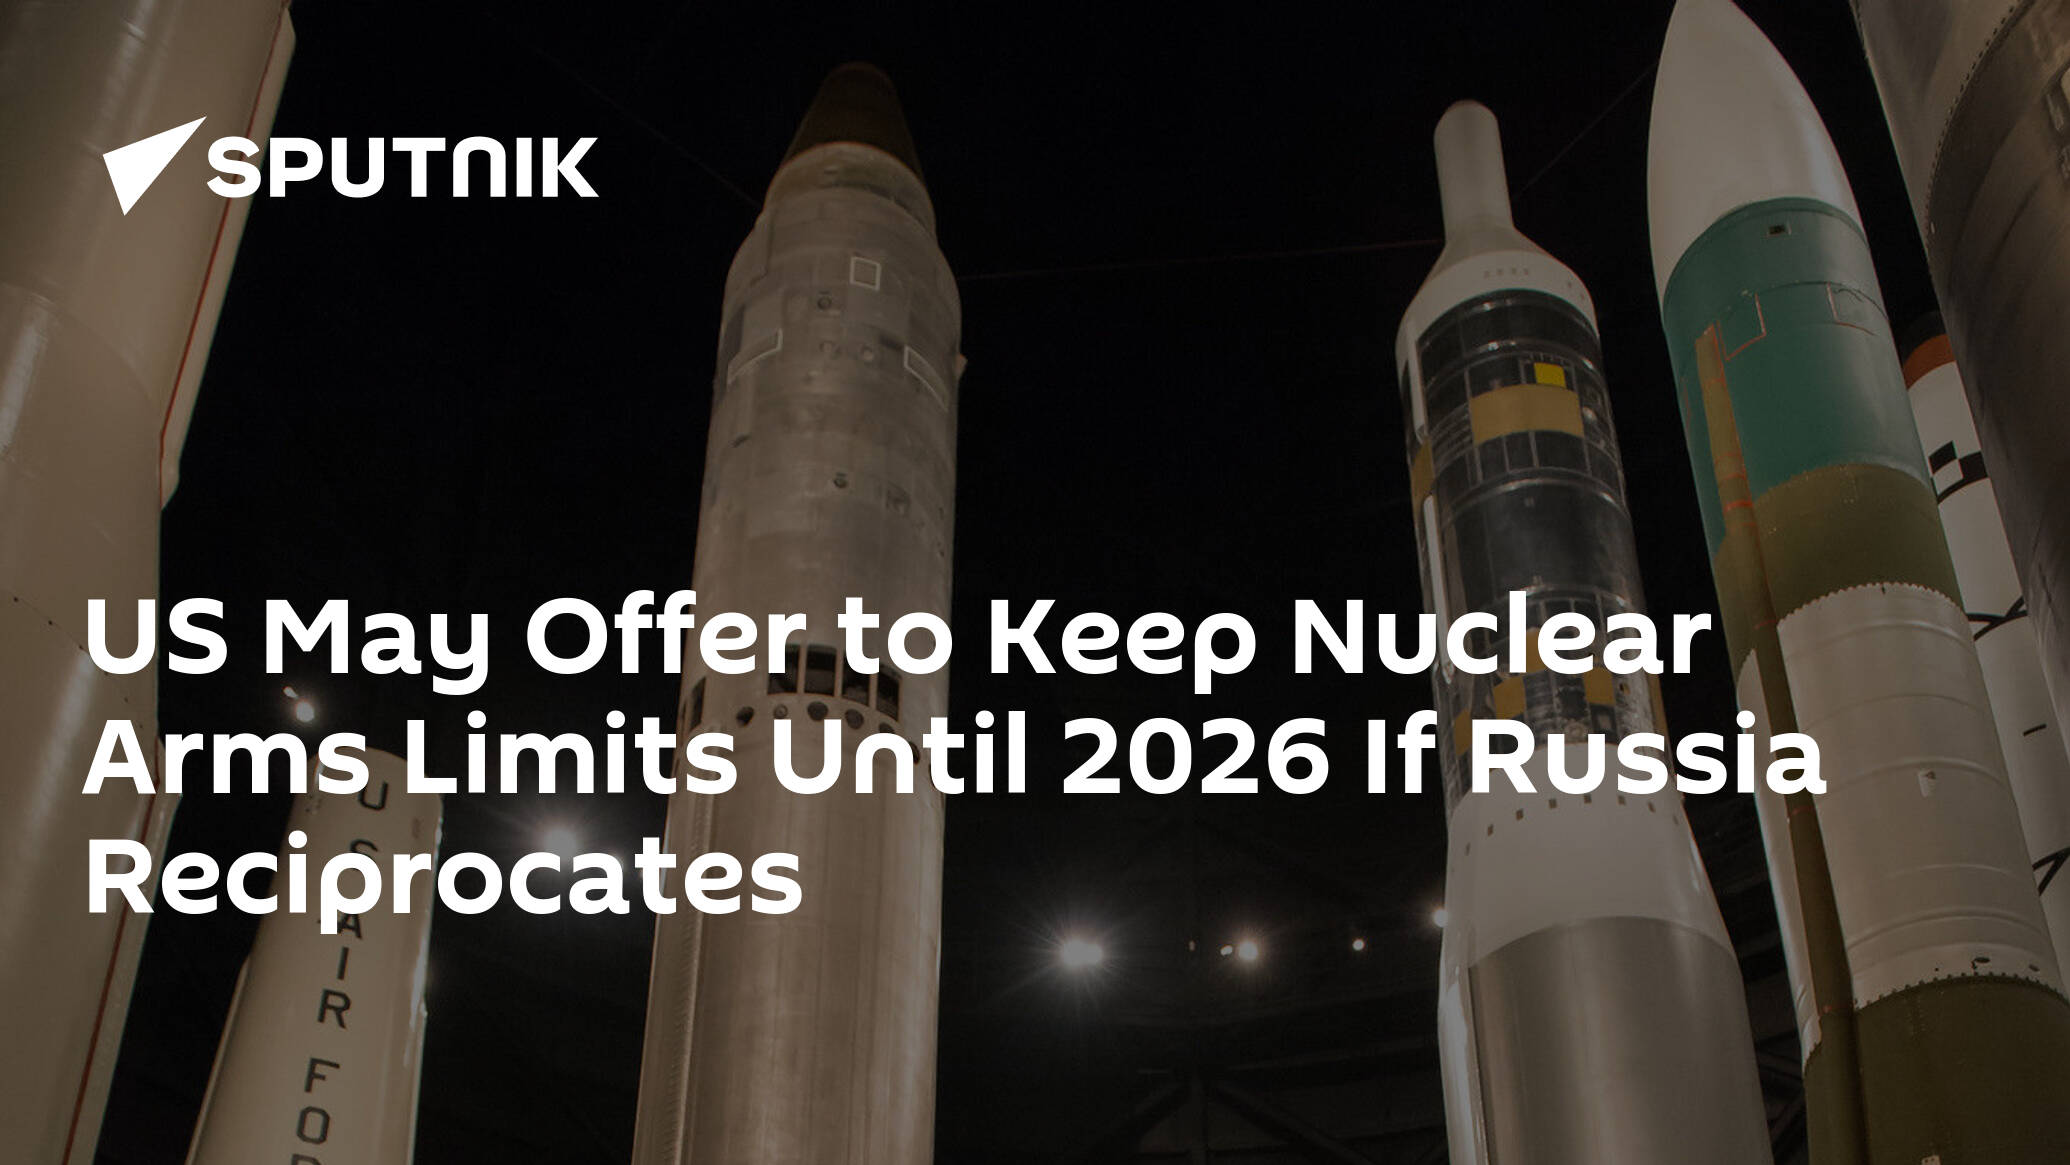 US May Offer to Keep Nuclear Arms Limits Until 2026 If Russia Reciprocates